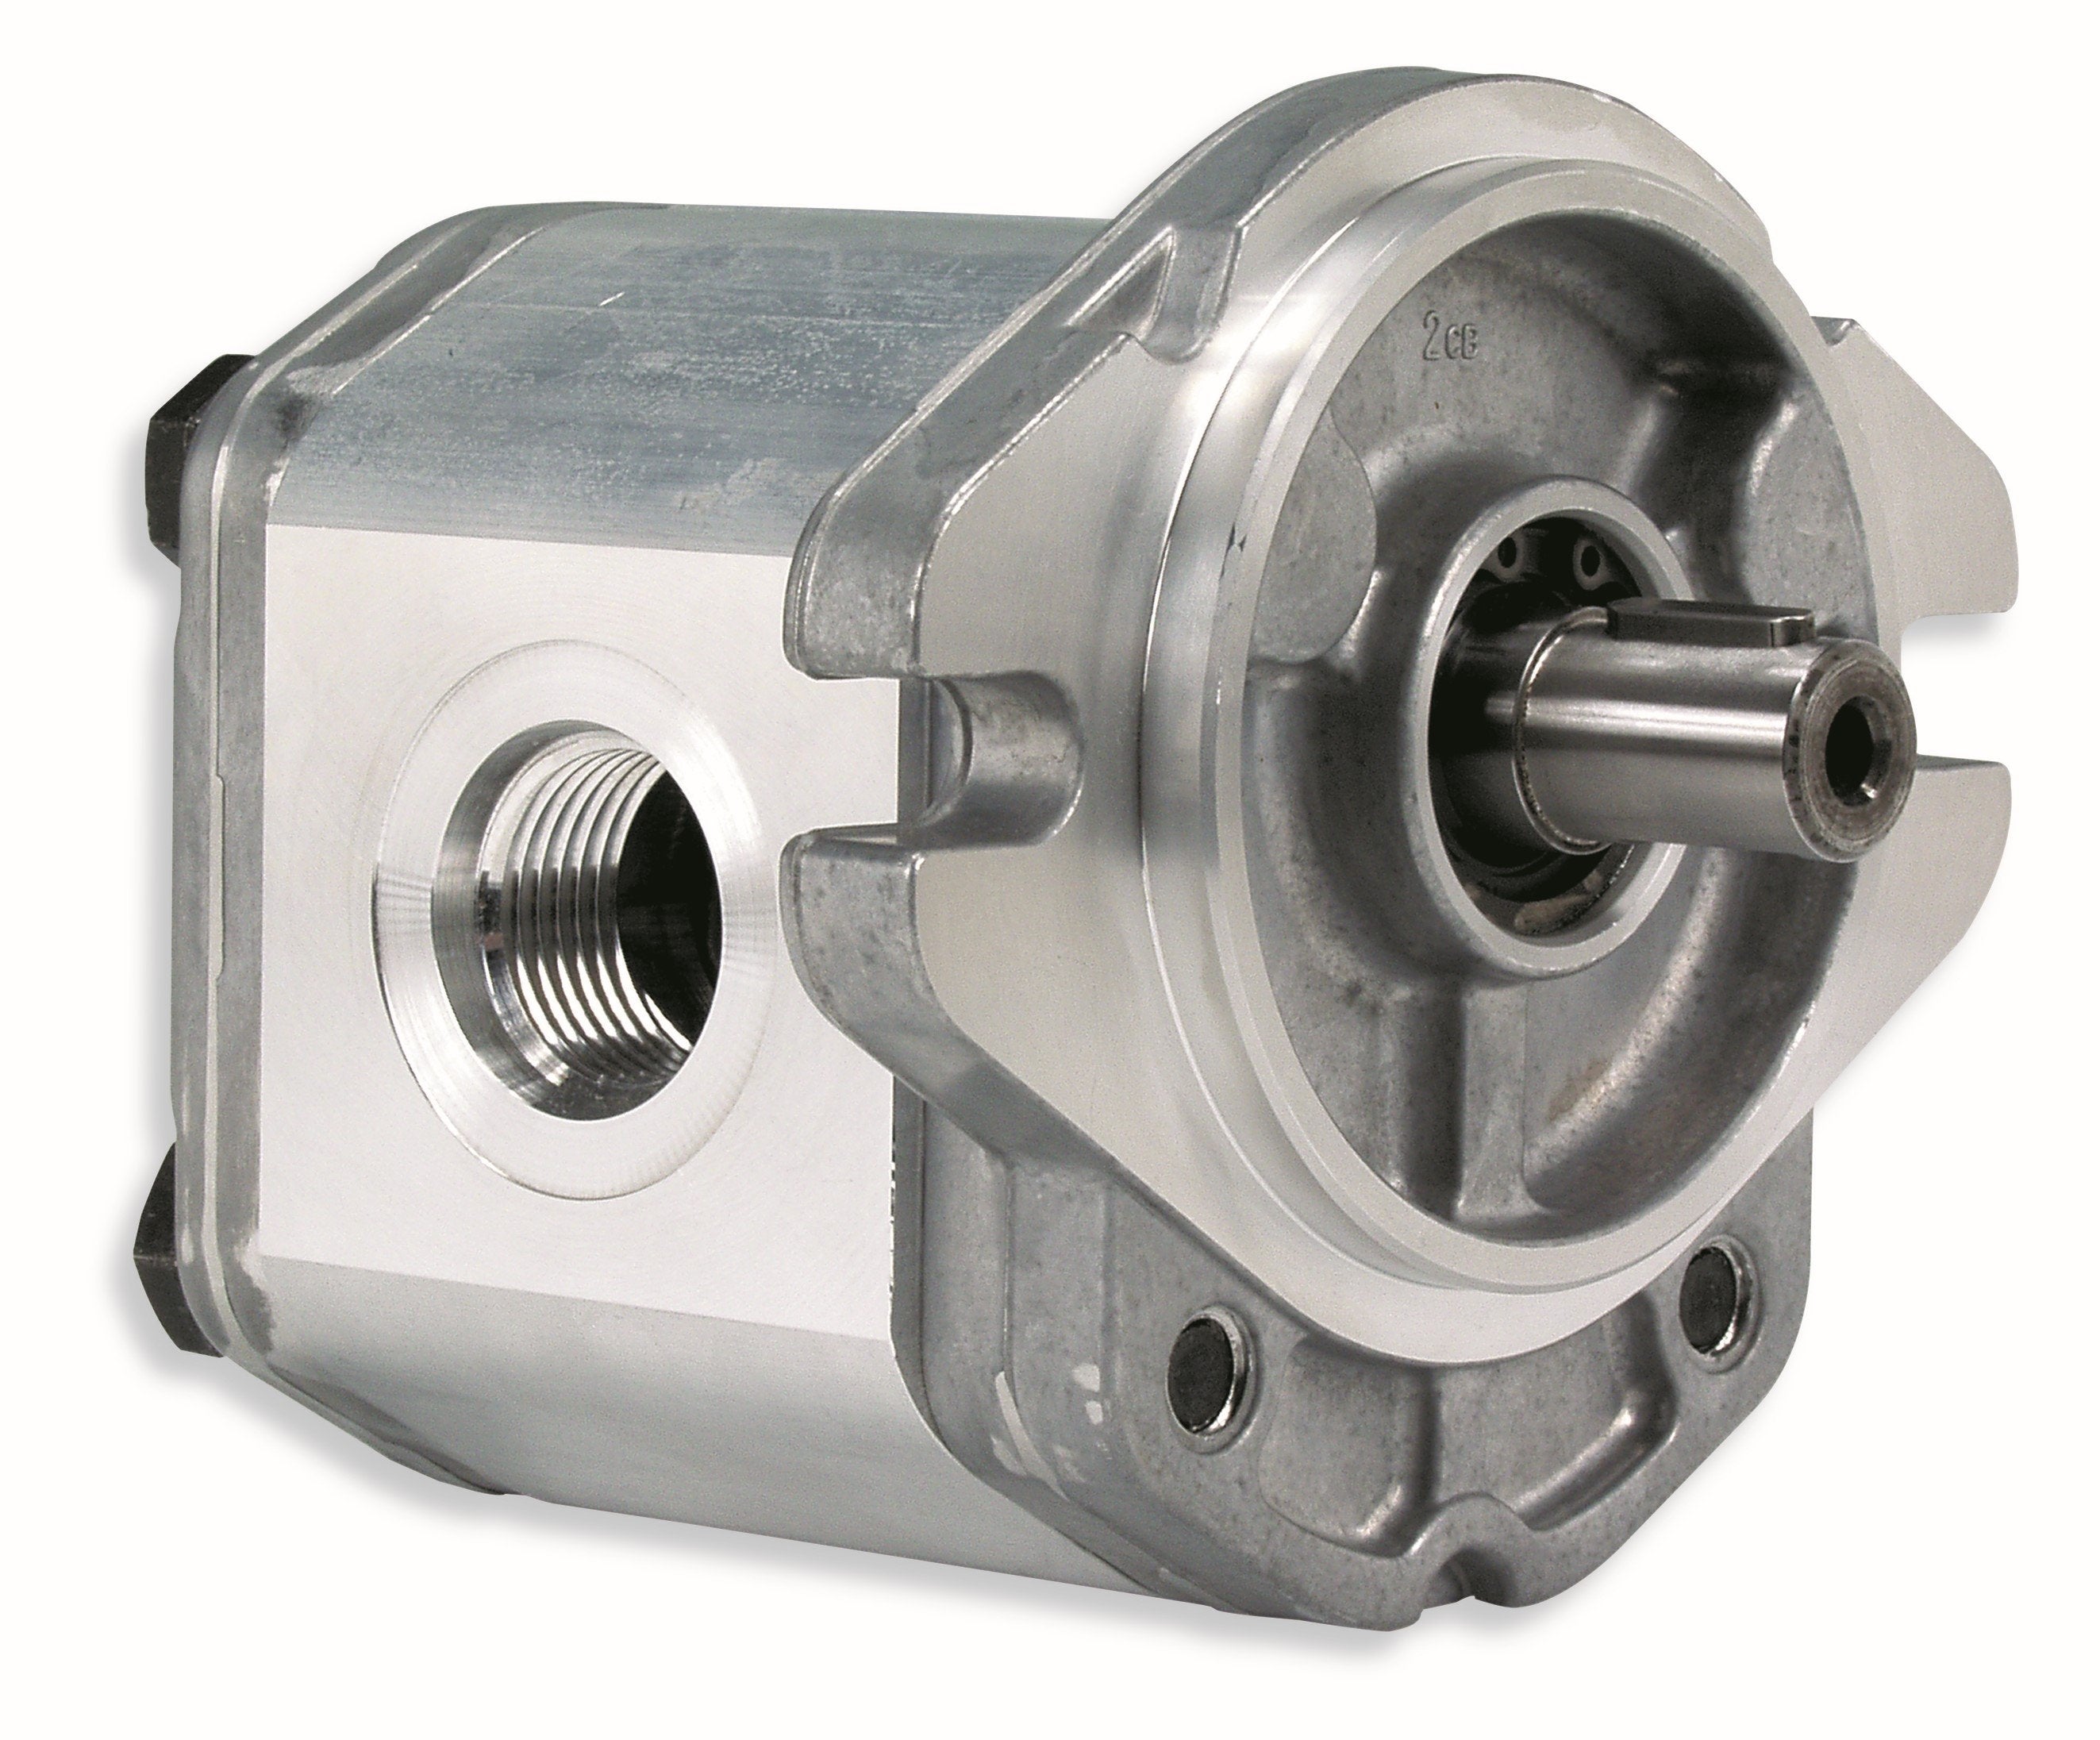 GHM2A-R-25-S1-E2 : Marzocchi Gear Motor, Bidirectional, 17.9cc, 3770psi rated, 2500RPM, 0.75 (3/4") #12 SAE ports, 9T 16/32DP Splined Shaft